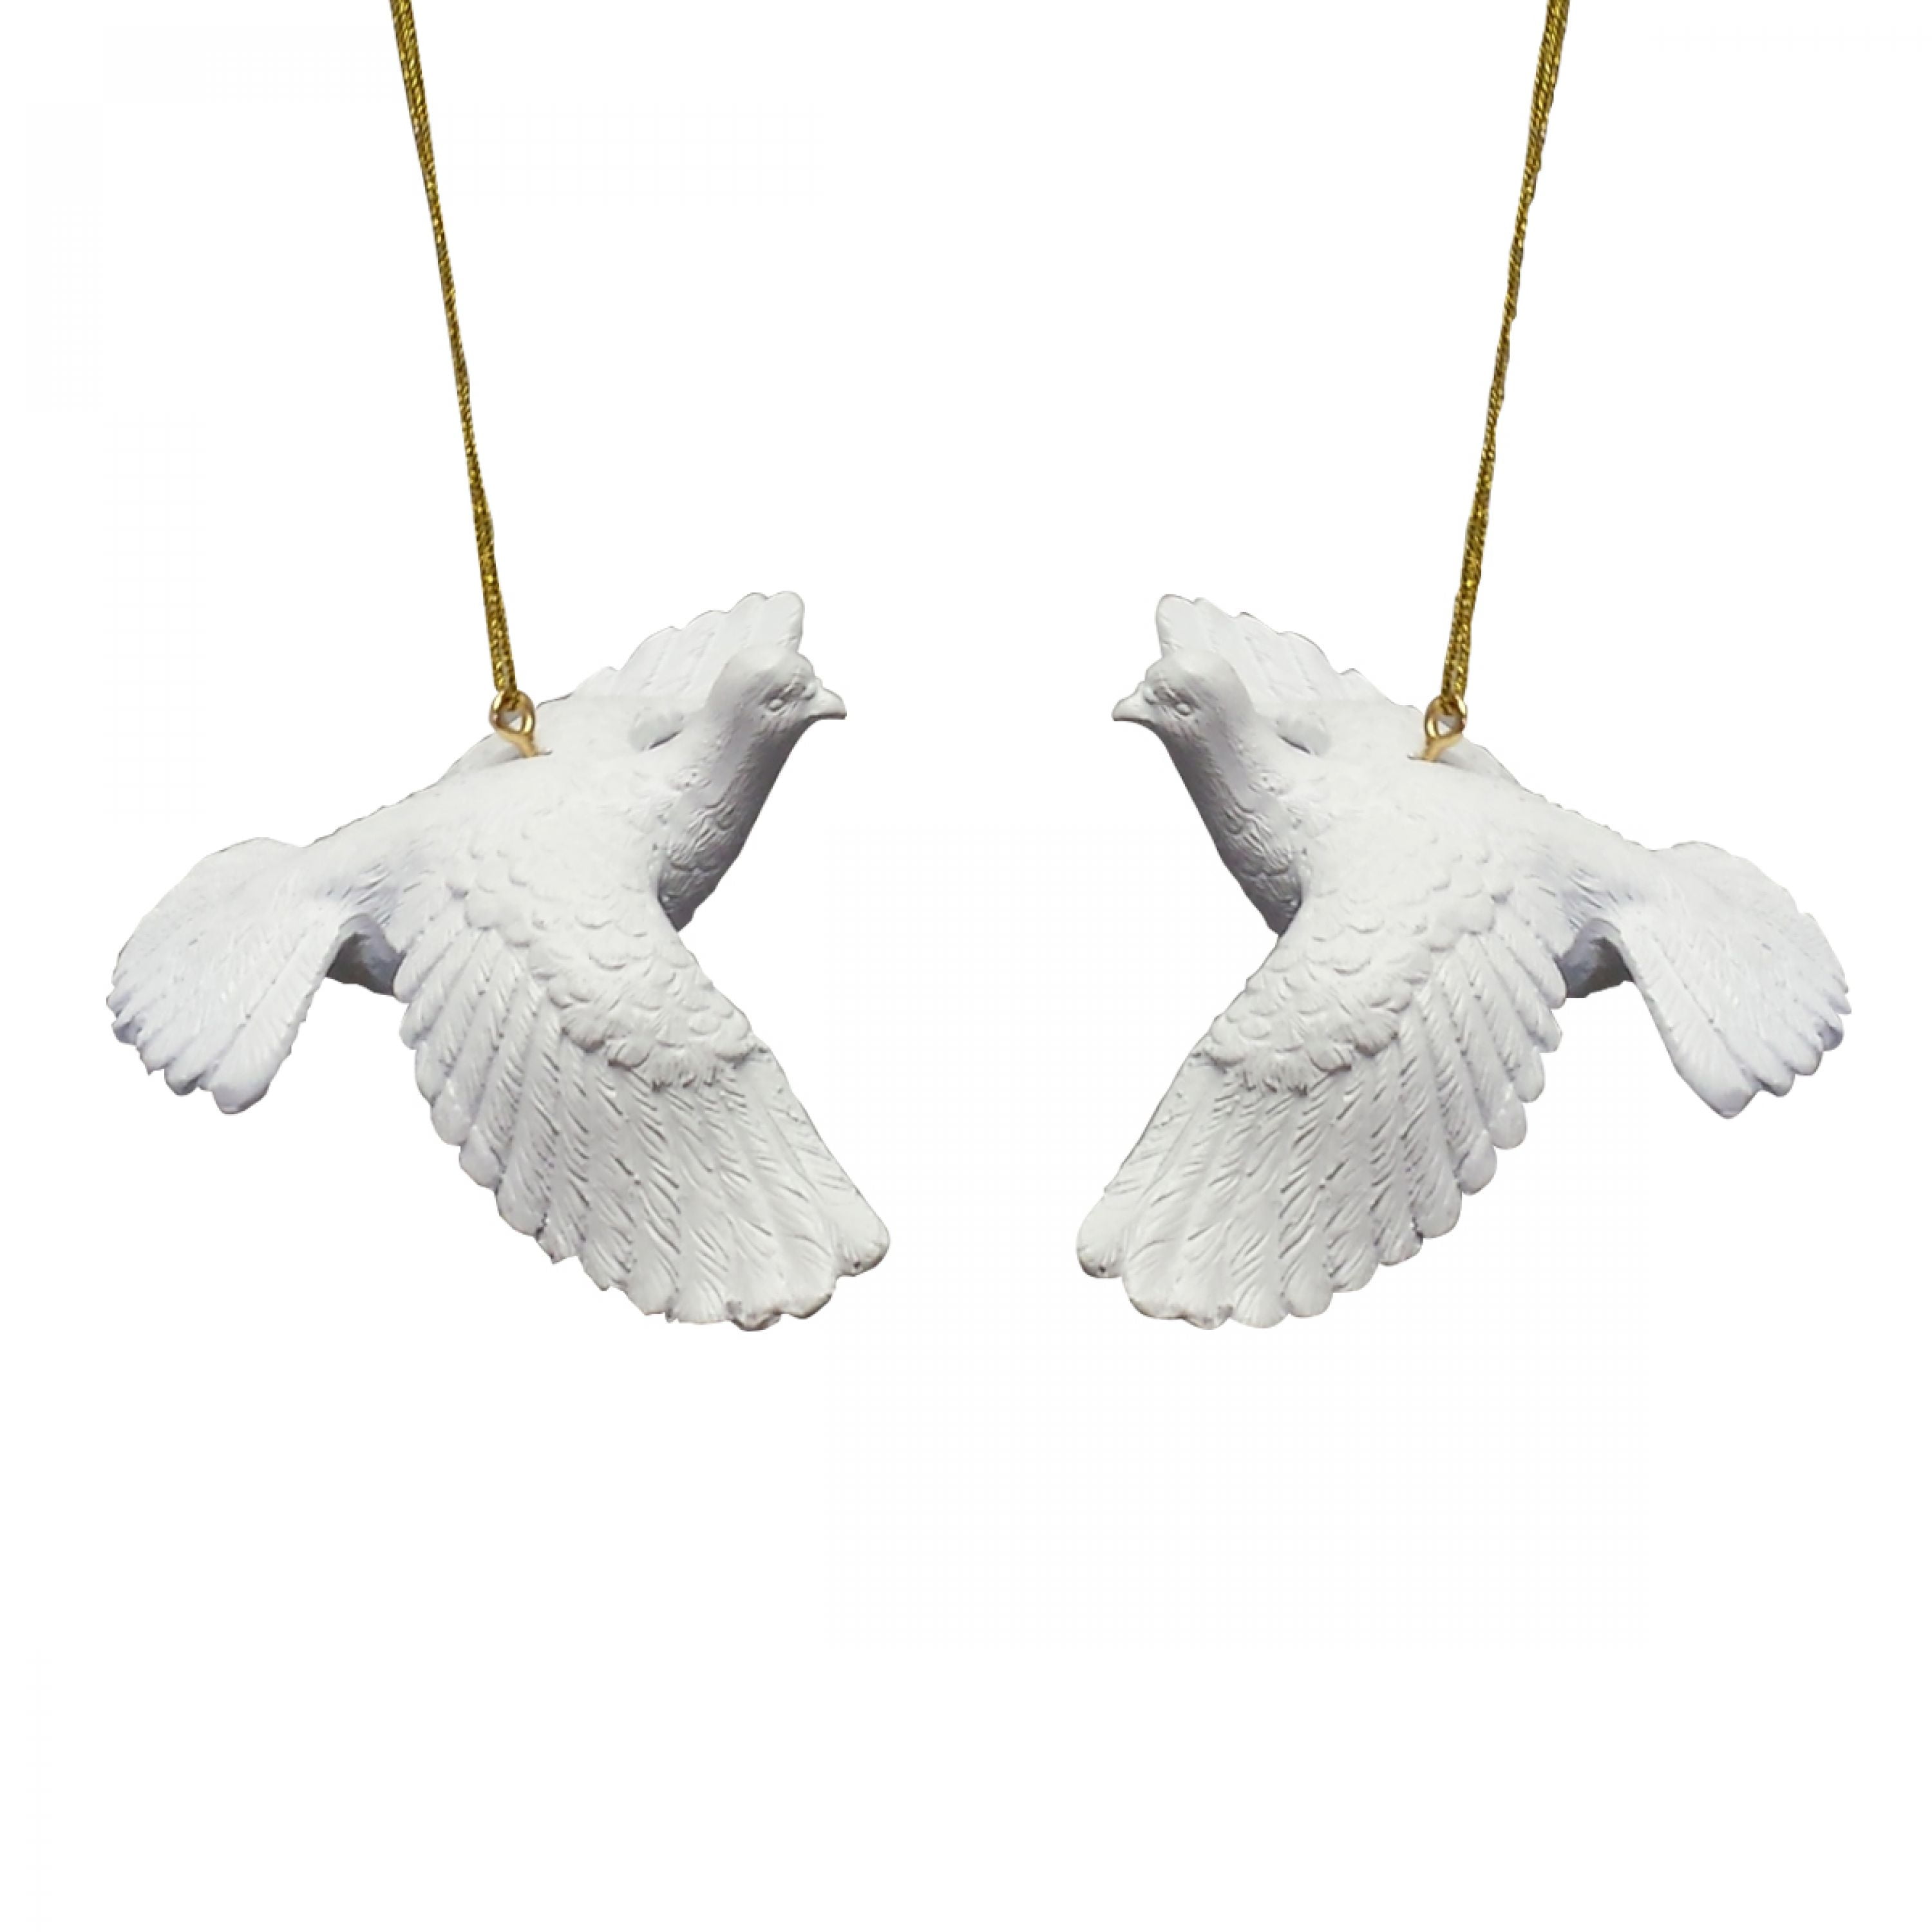 As Seen in Home Alone 2 Set of 2 Turtle Dove Ornaments